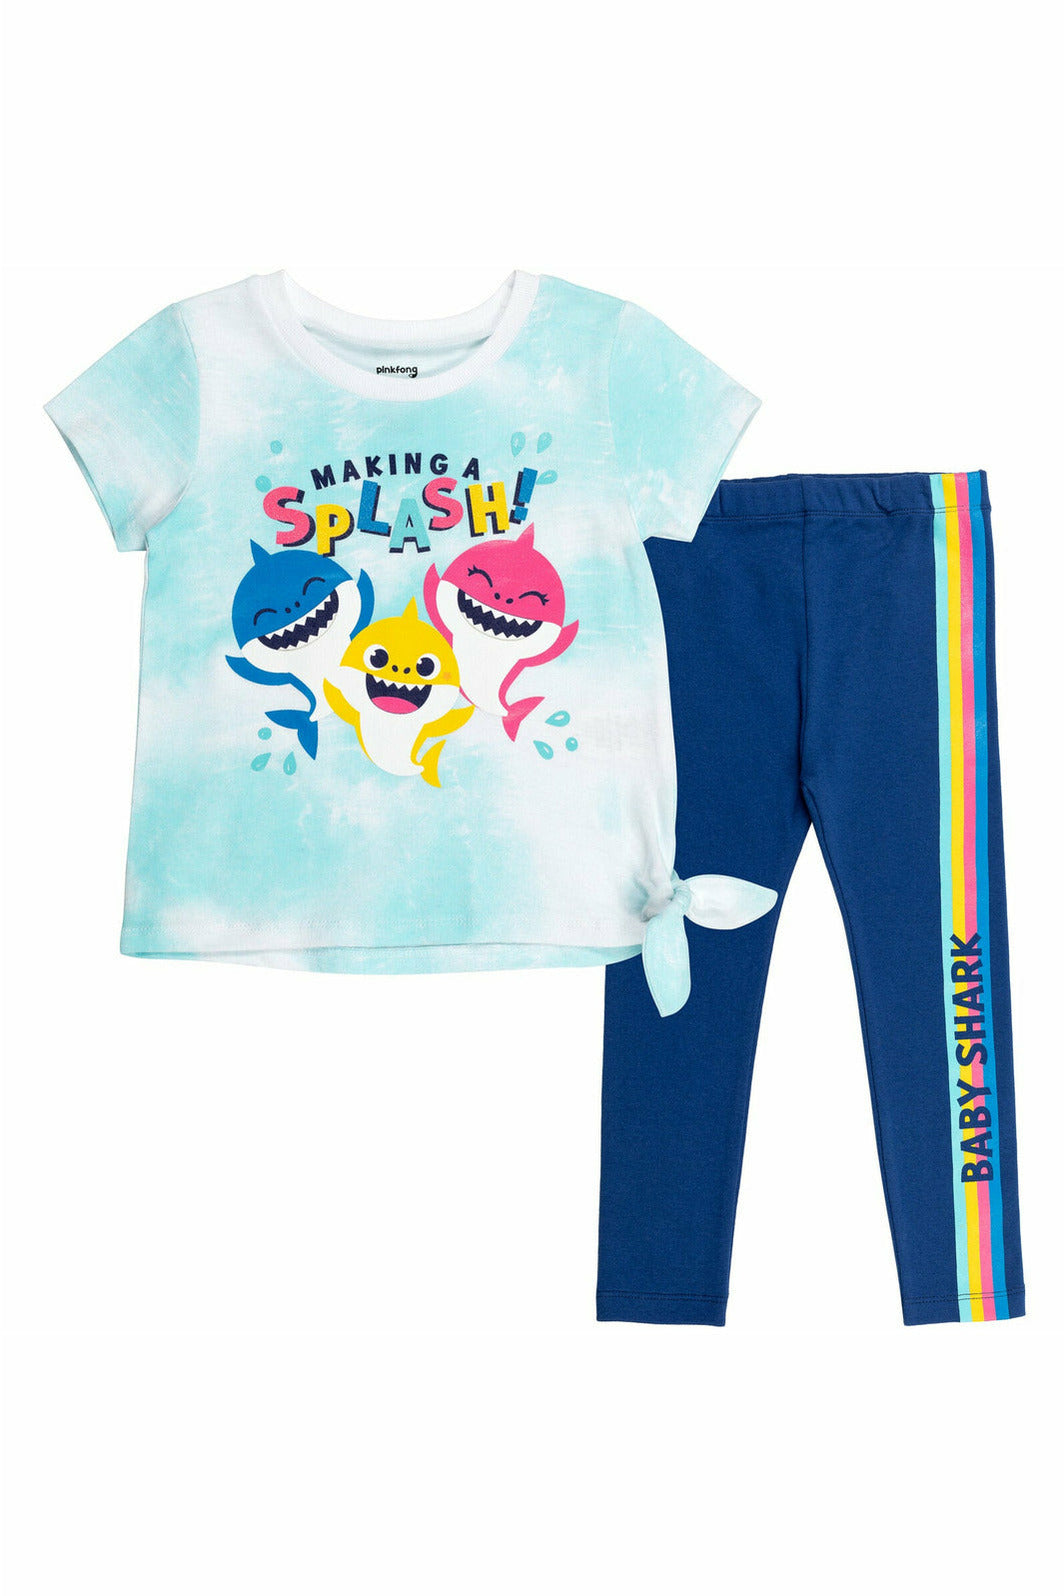 Pinkfong Baby Shark Knotted Graphic T-Shirt & Leggings